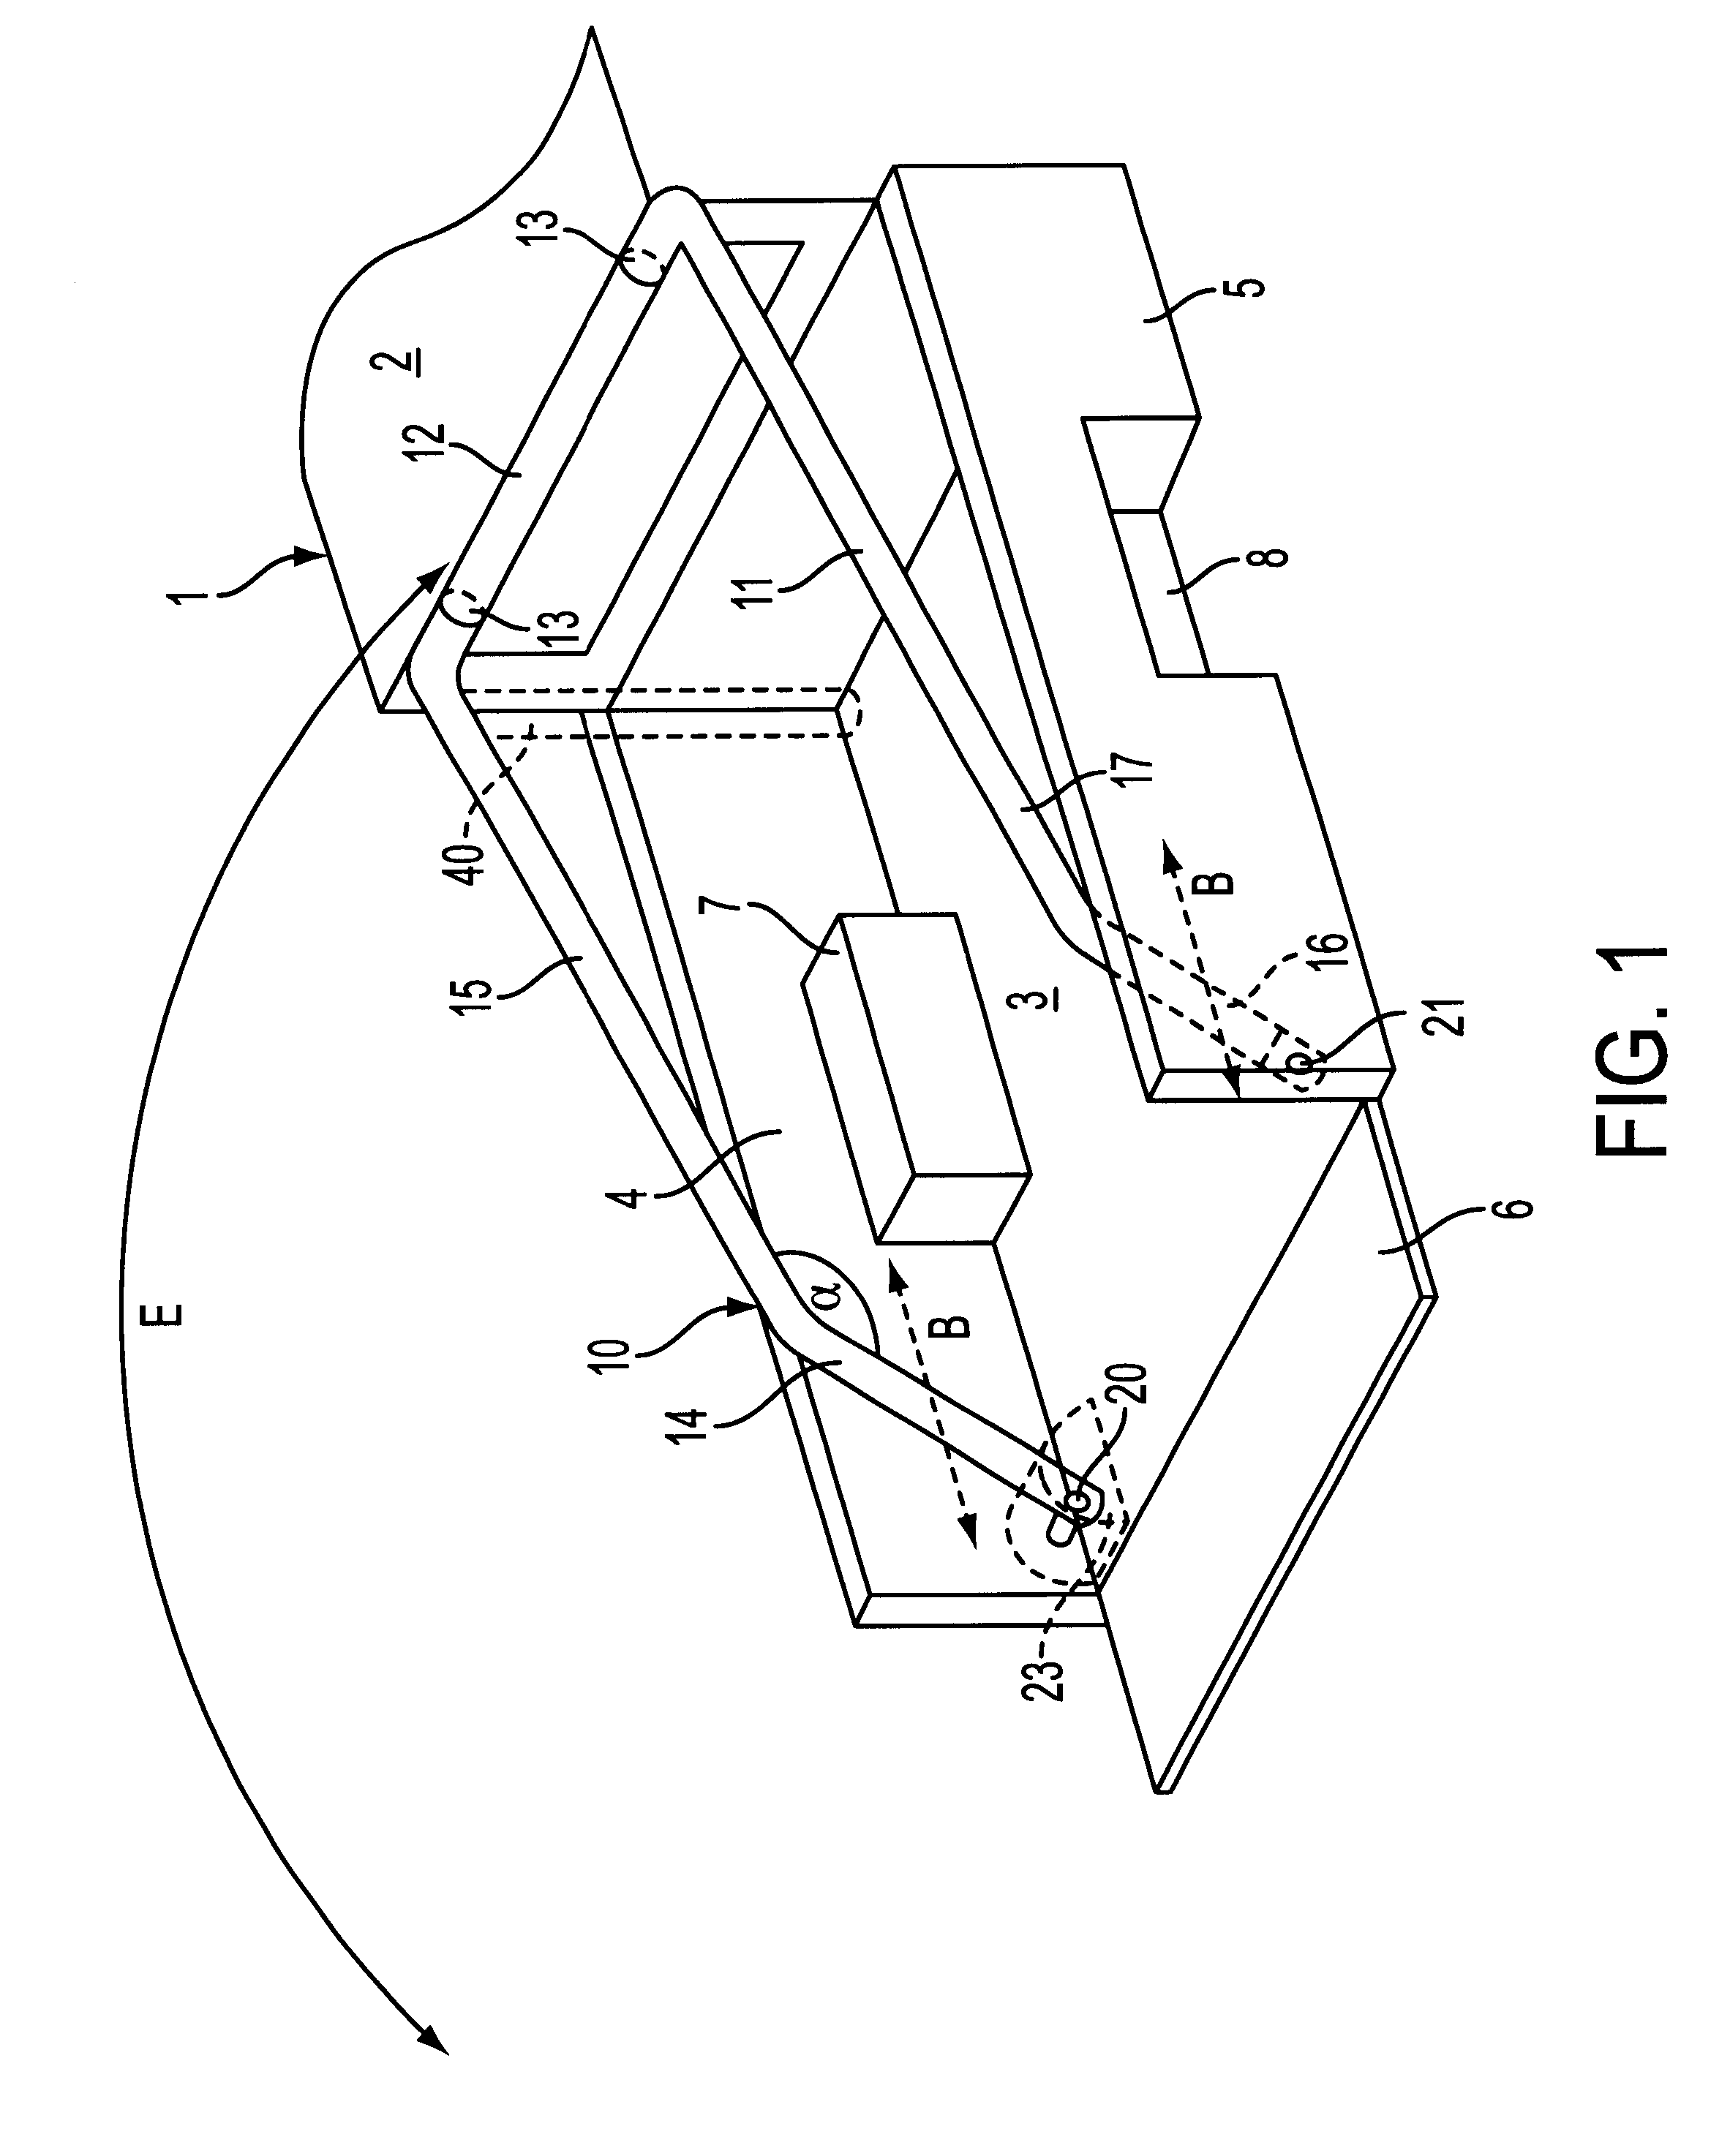 Pick-up vehicle having a swivel device, swivel device, and process for loading and unloading the pick-up vehicle